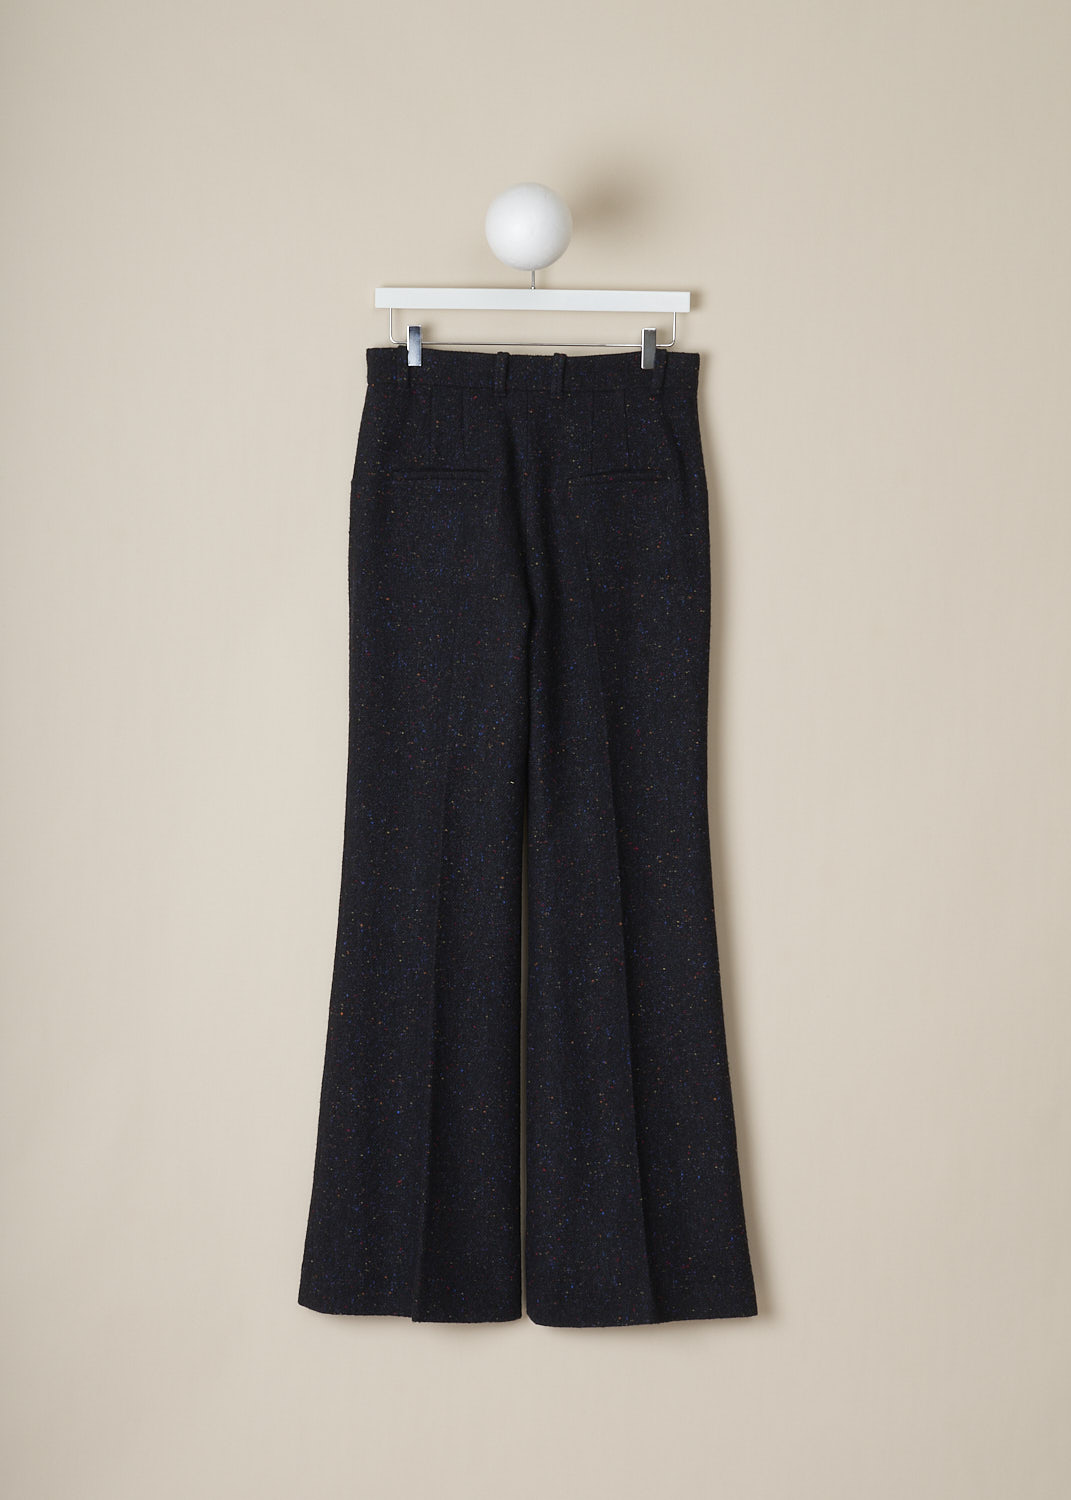 CHLOÃ‰, HIGH-WAISTED SPECKLED PANTS, CHC22APA141654D2_ANTHRACITE_BLUE, Blue, Grey, Print, Back, This high-waisted pants have an anthracite blue base color with multicolored speckles throughout. These pants have a narrow waistband with belt loops and a concealed zip closure. These pants have slanted pocket sin the front and welt pockets in the back. The flared pant legs have centre creases along the front and back. 
